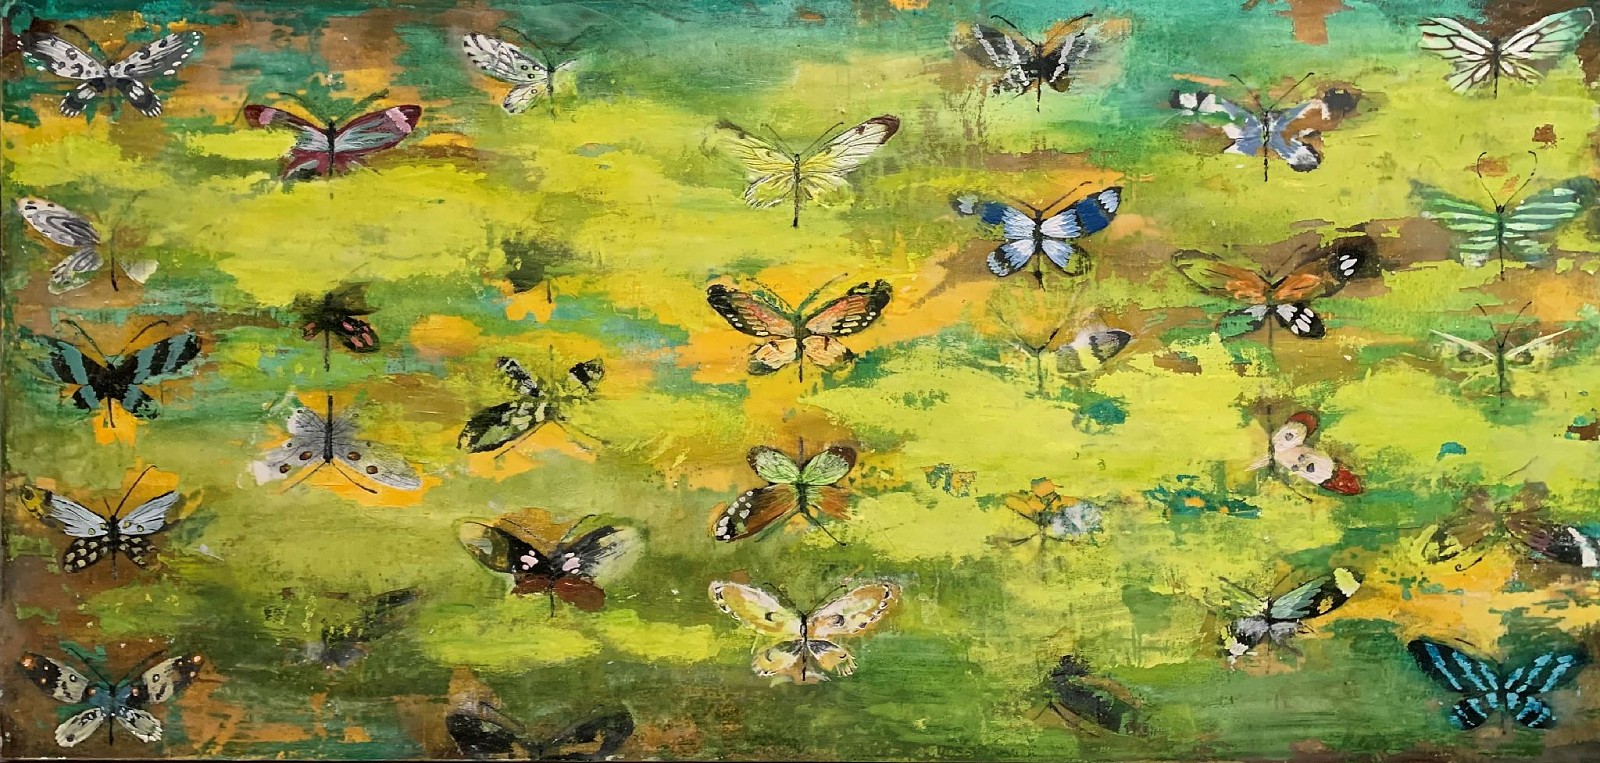 Chris Reilly, Generations #4, 2021
Encaustic and Mixed Media, 30 x 60 in. (76.2 x 152.4 cm)
07945